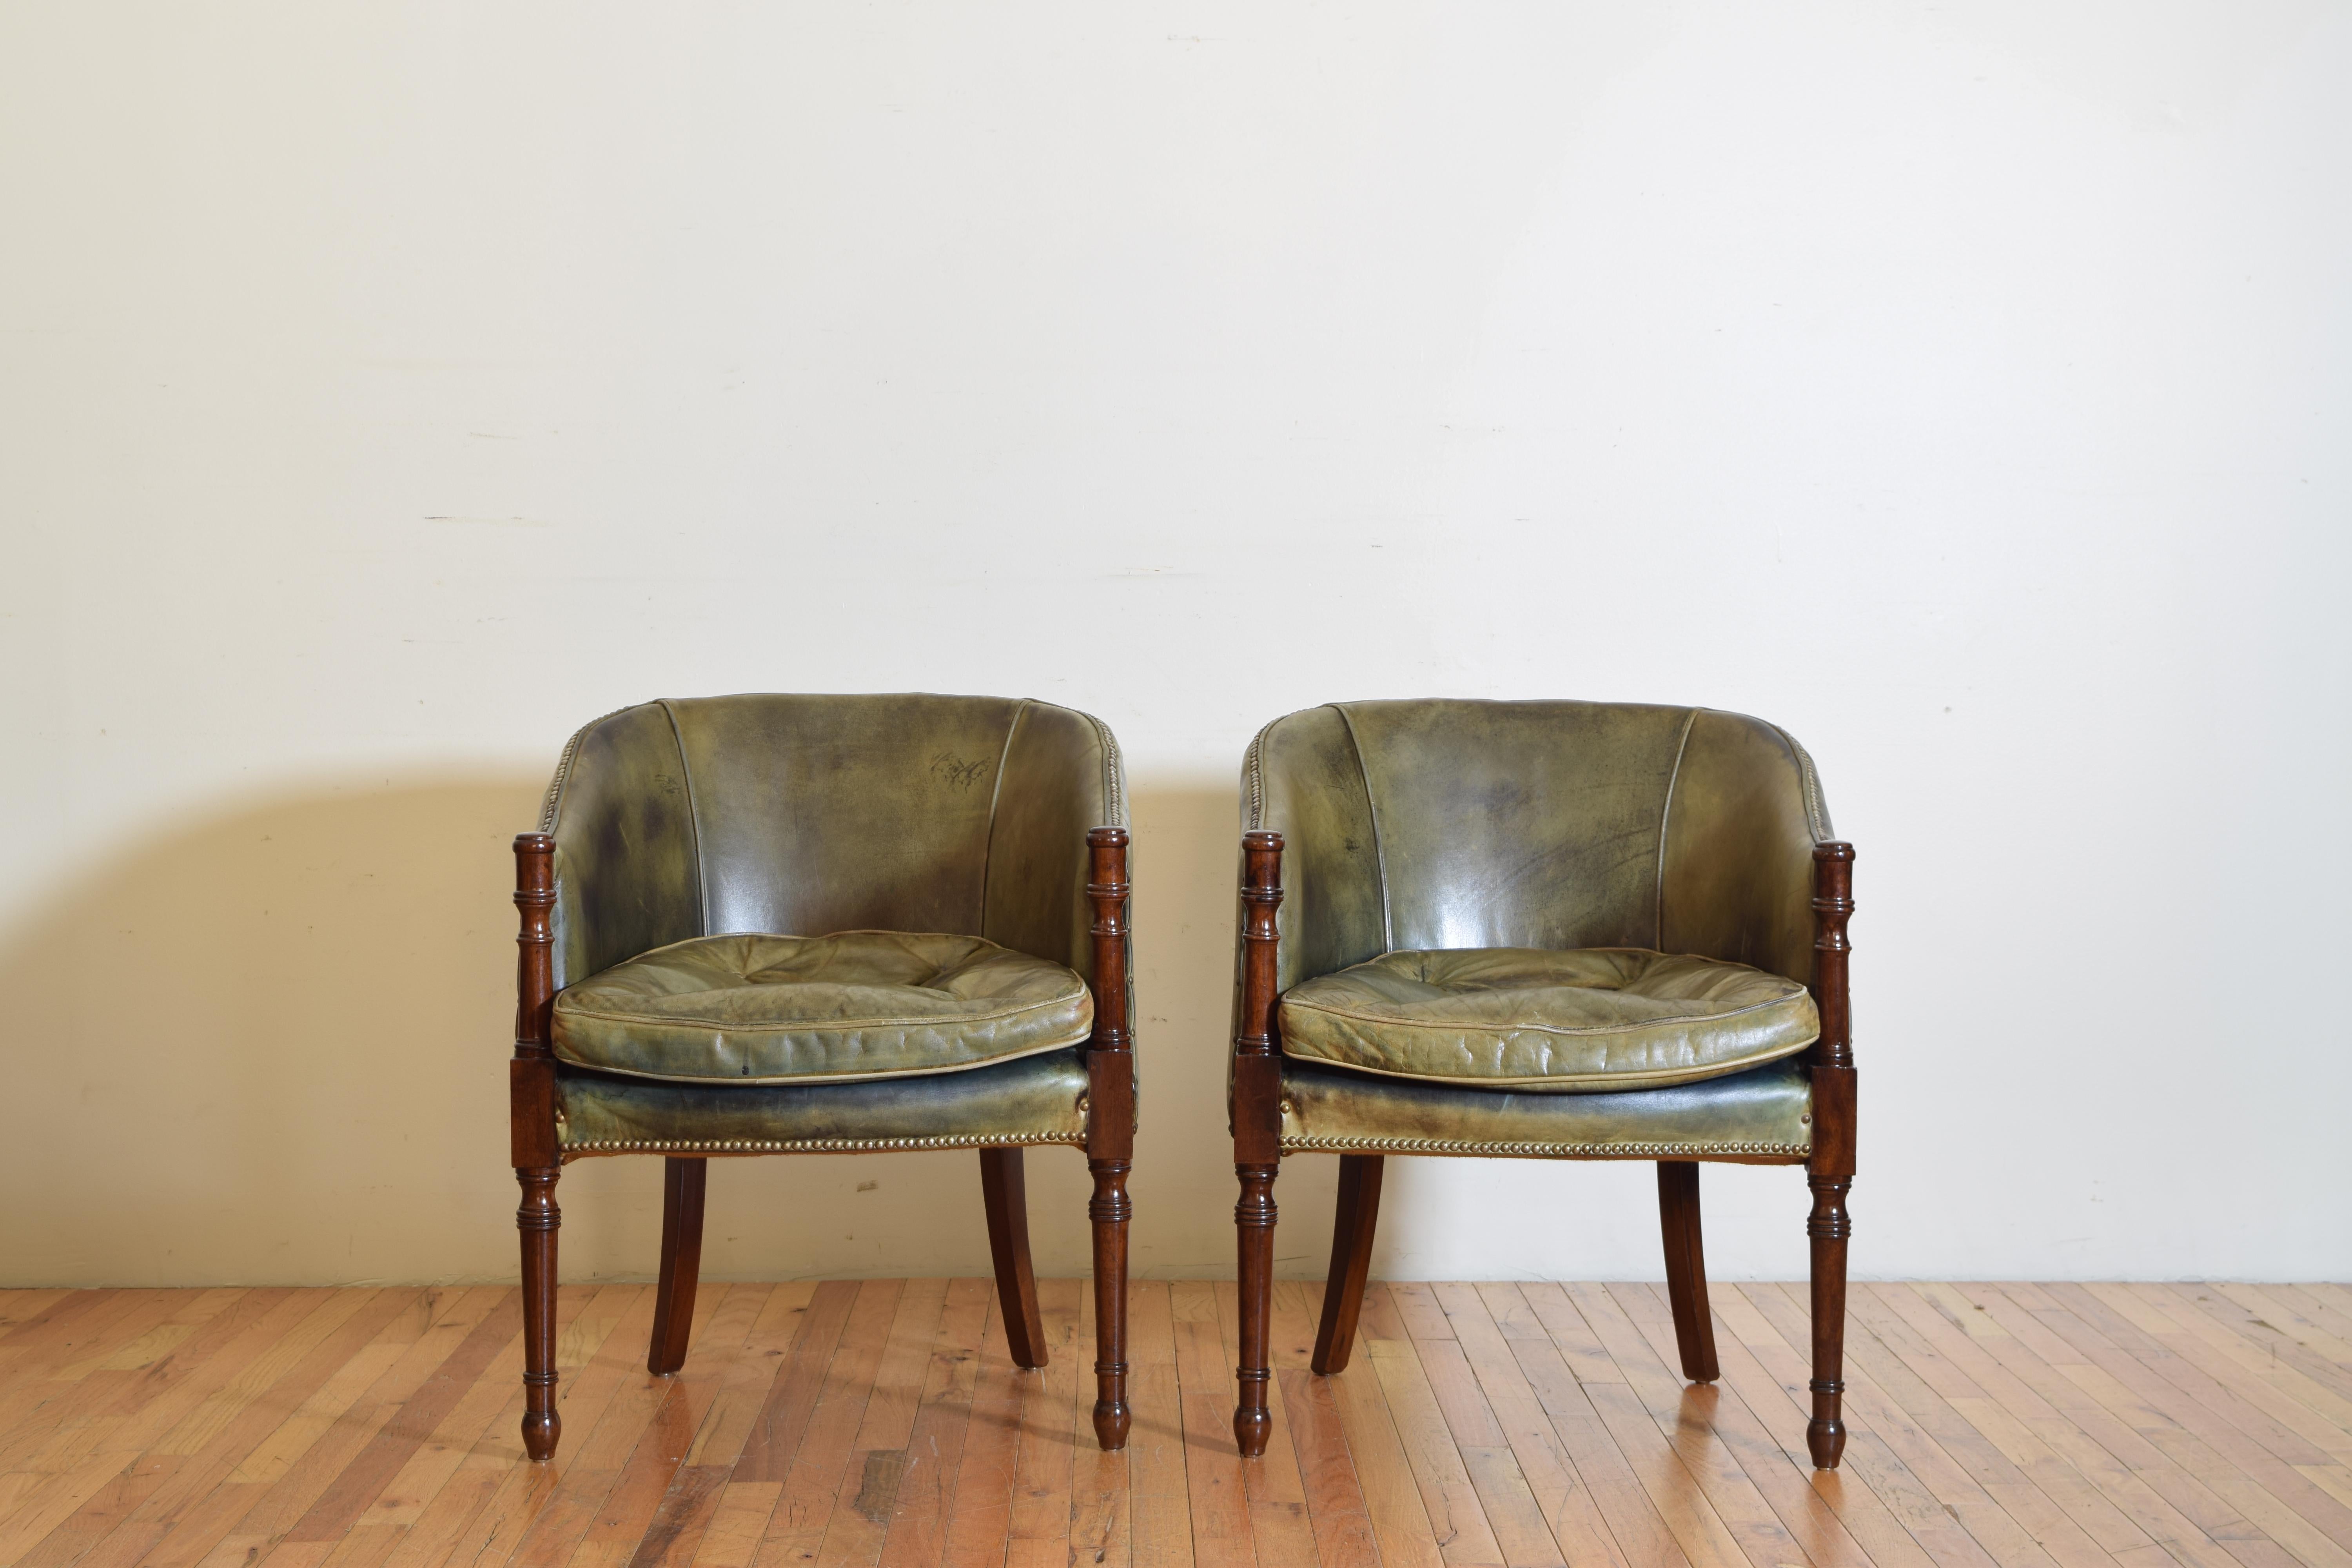 Mid-20th Century Pair of English Regency Style Mahogany Club Chairs in Green Leather 20th Century